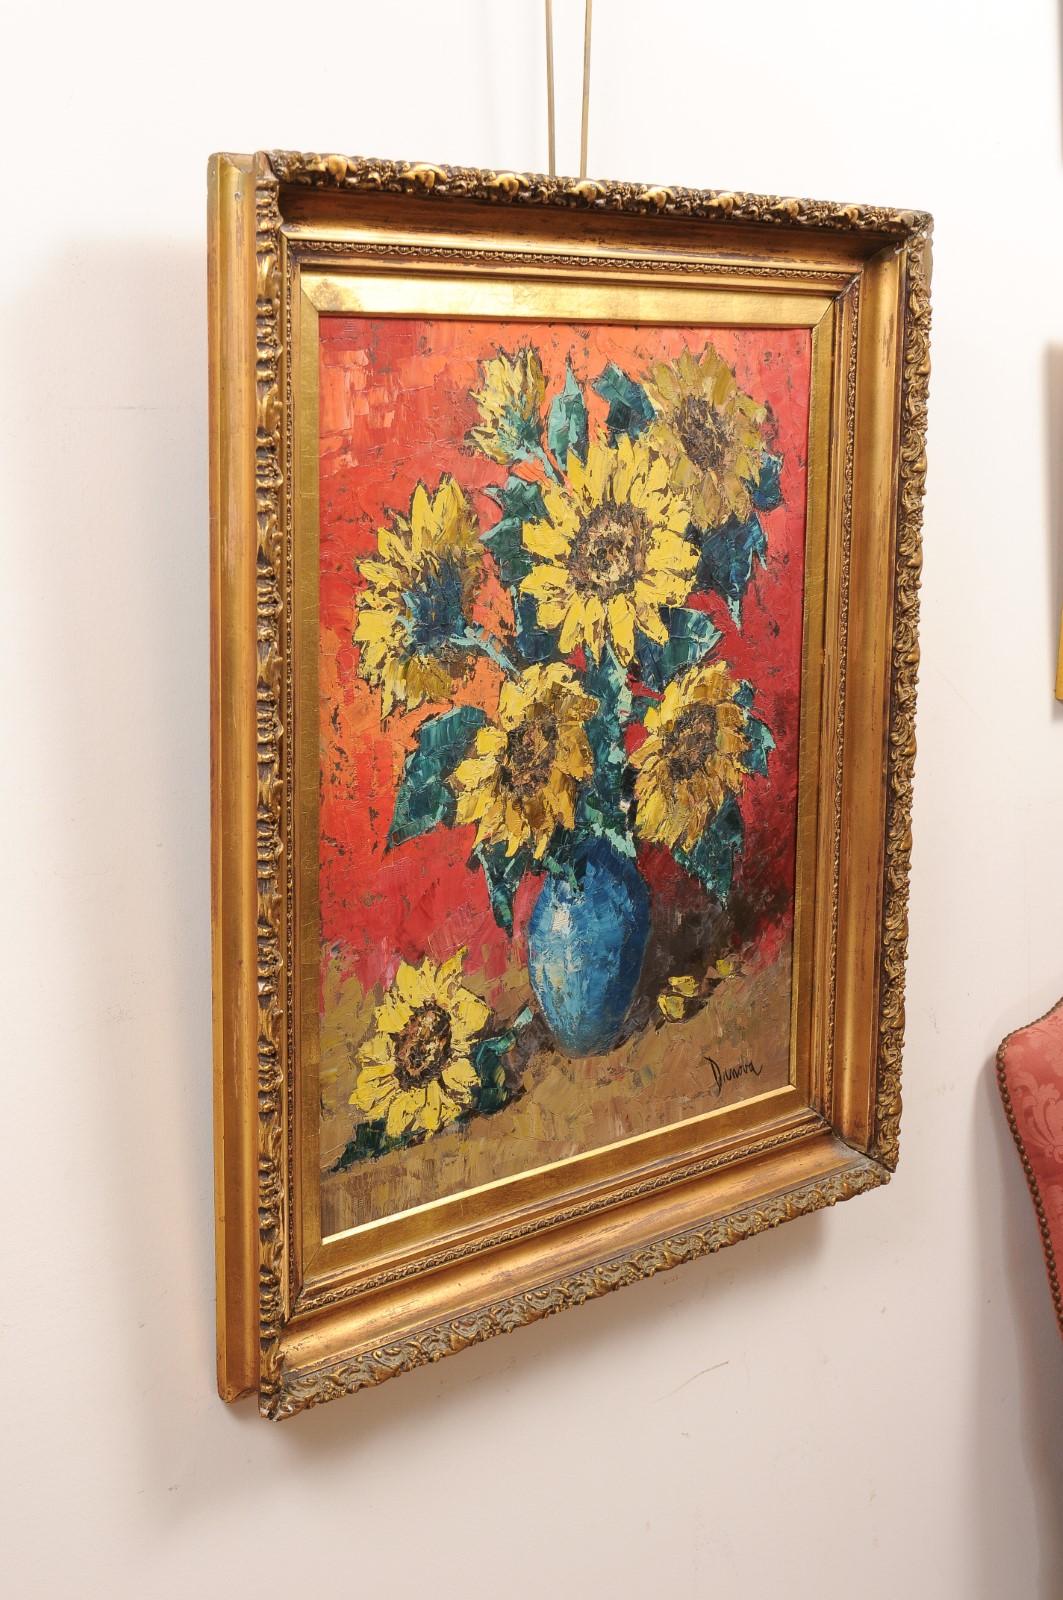  Giltwood Framed Oil on Board Painting of Sunflowers in Vase, Signed, 20th c. For Sale 6